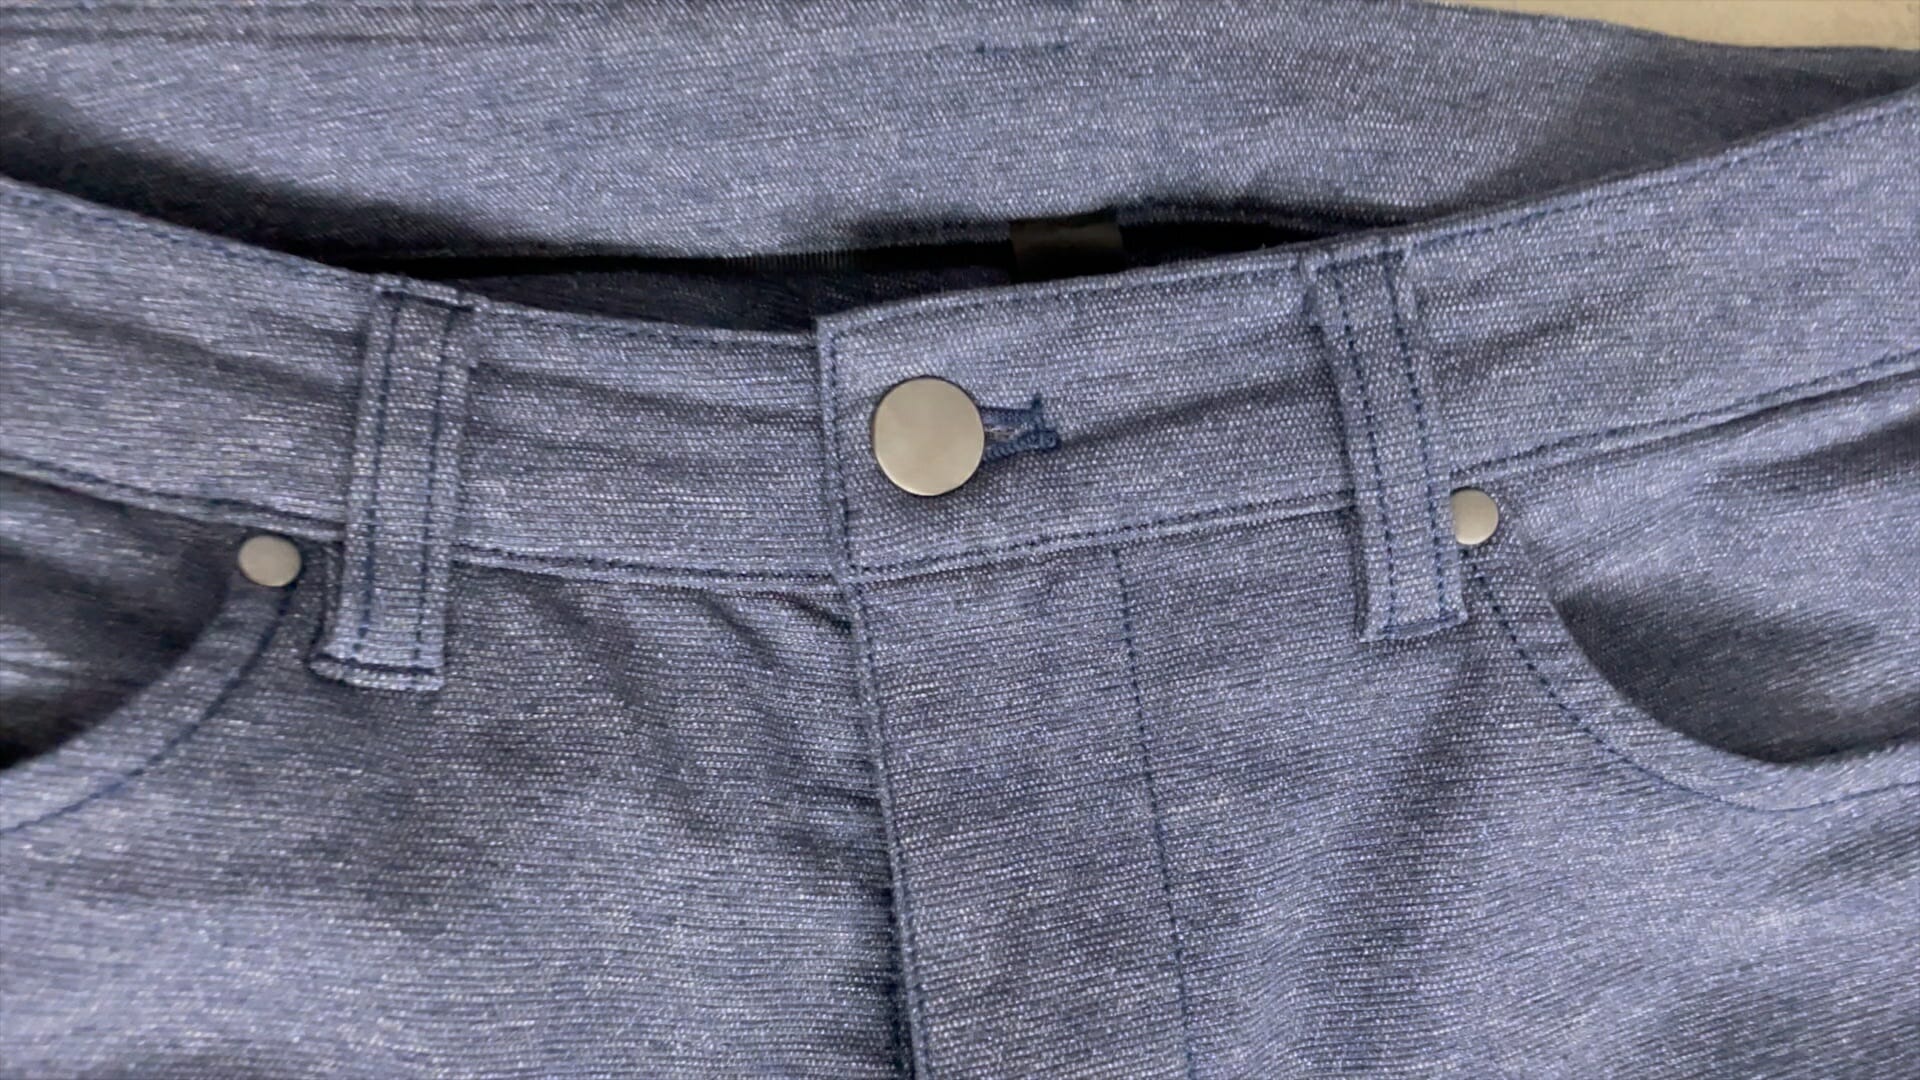 Lululemon "Jeans" are Here: Lululemon Tech Canvas Review 3